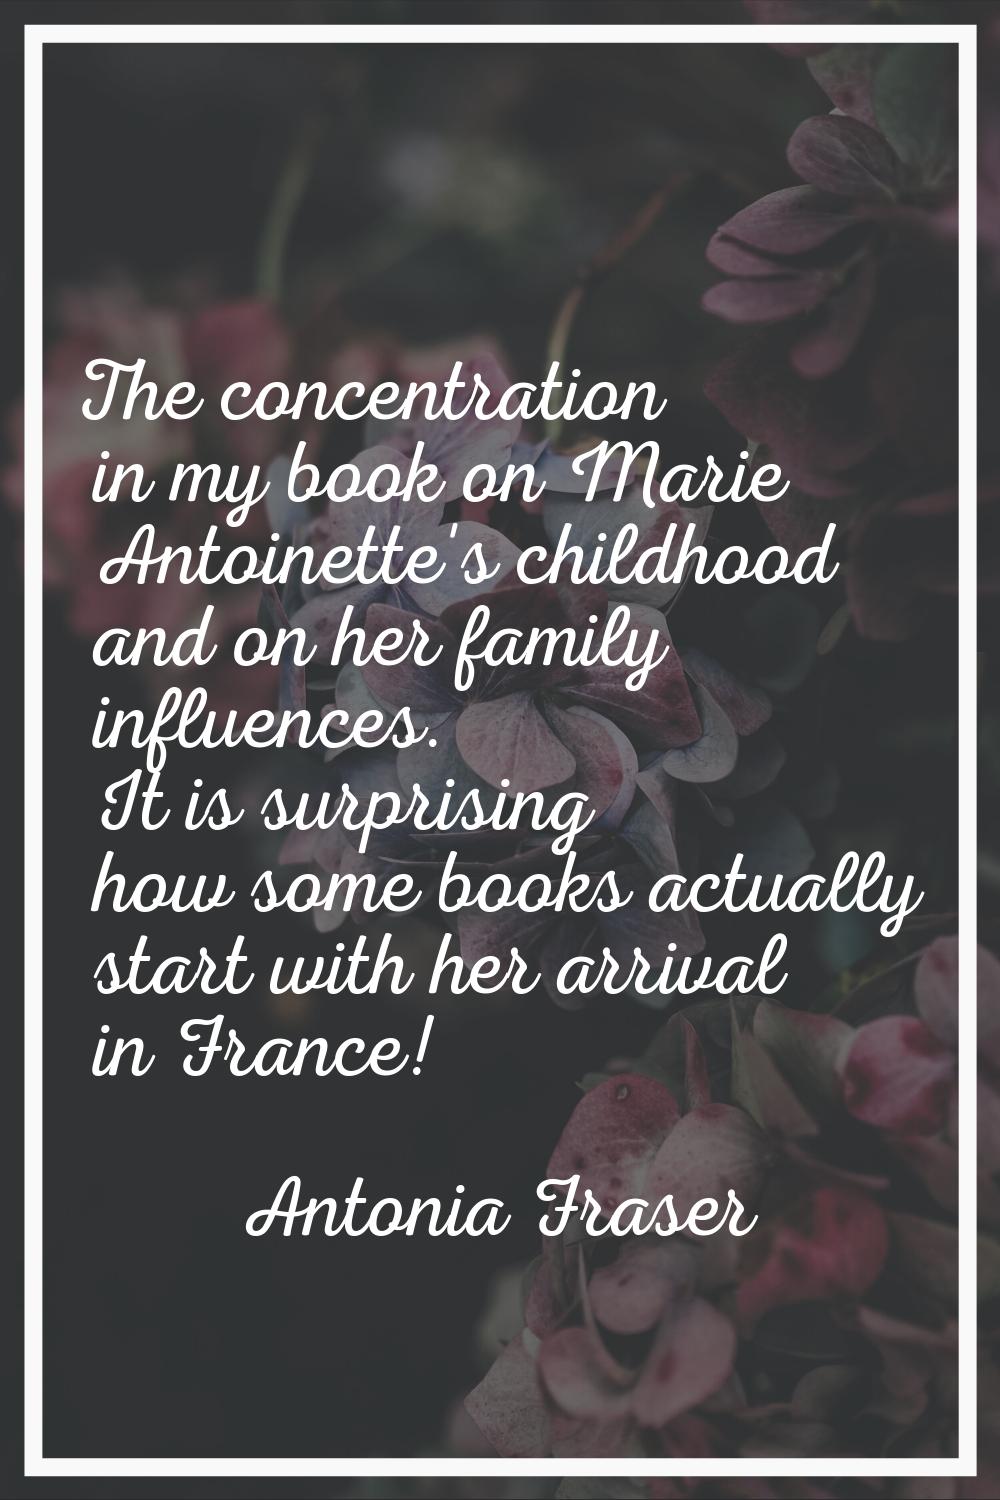 The concentration in my book on Marie Antoinette's childhood and on her family influences. It is su